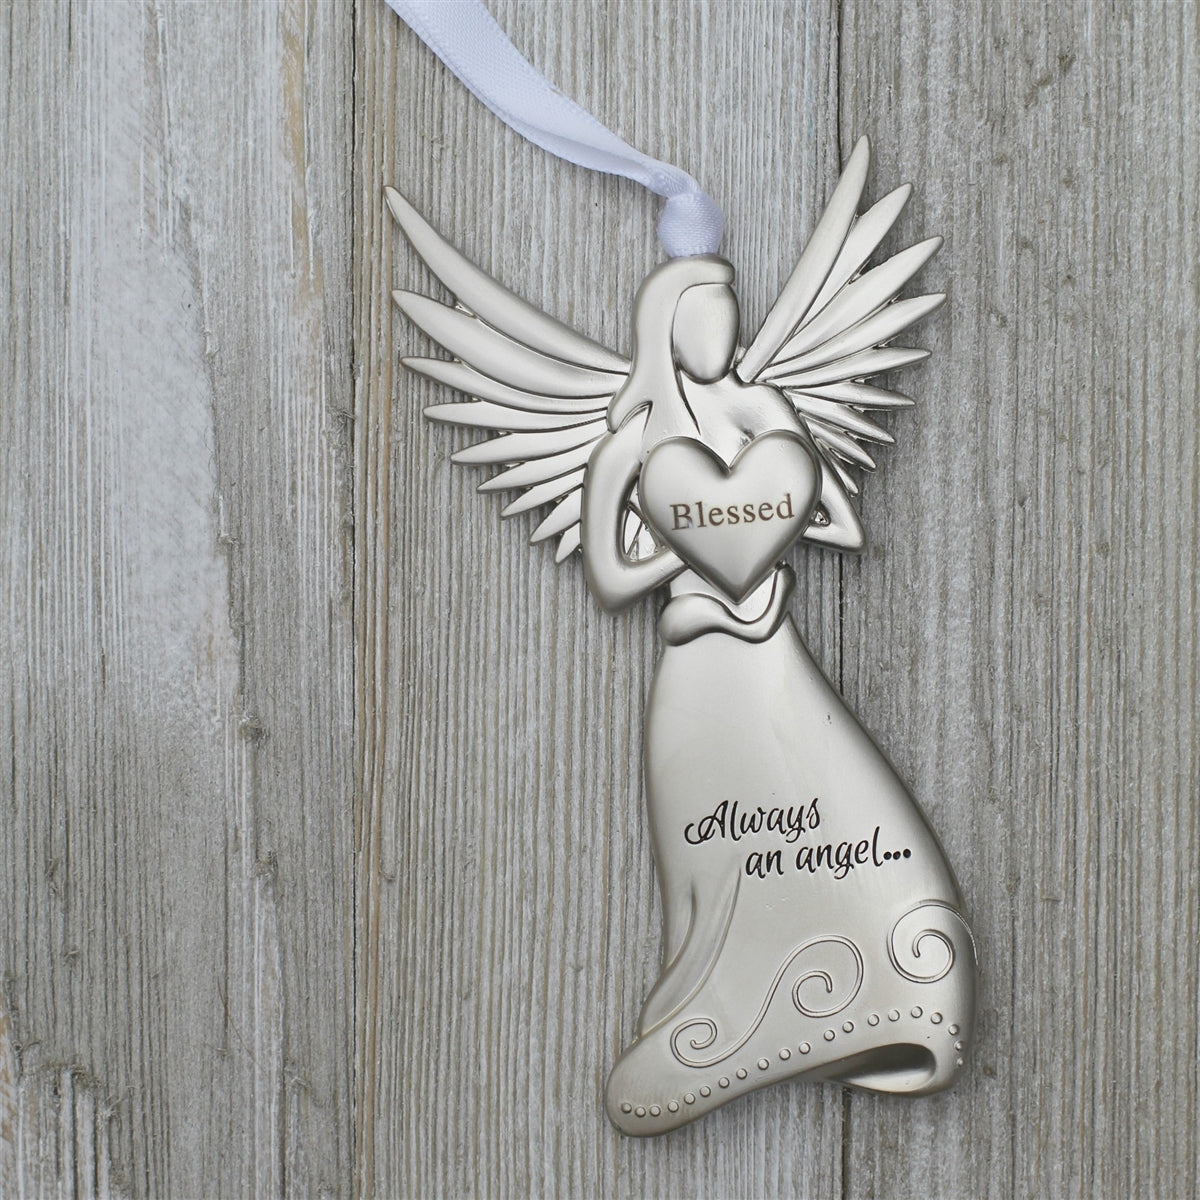 Silver toned metal angel holding a heart with the word &quot;Blessed&quot; in the center and &quot;Always and angel ...&quot; engraved on the angel&#39;s skirt